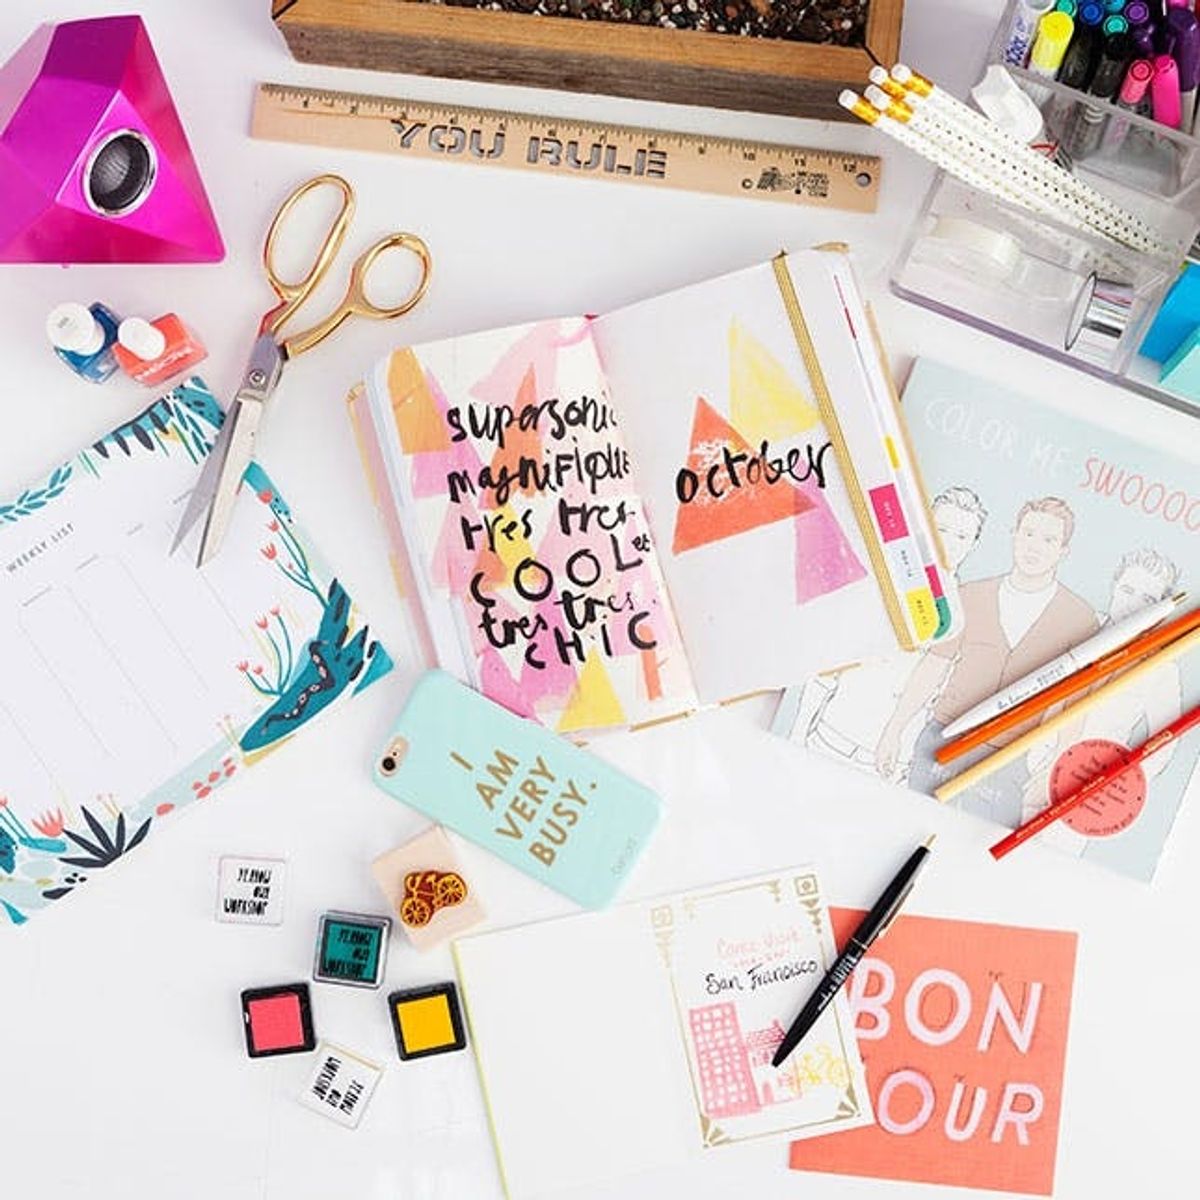 8 Creative Workspace Must-Haves